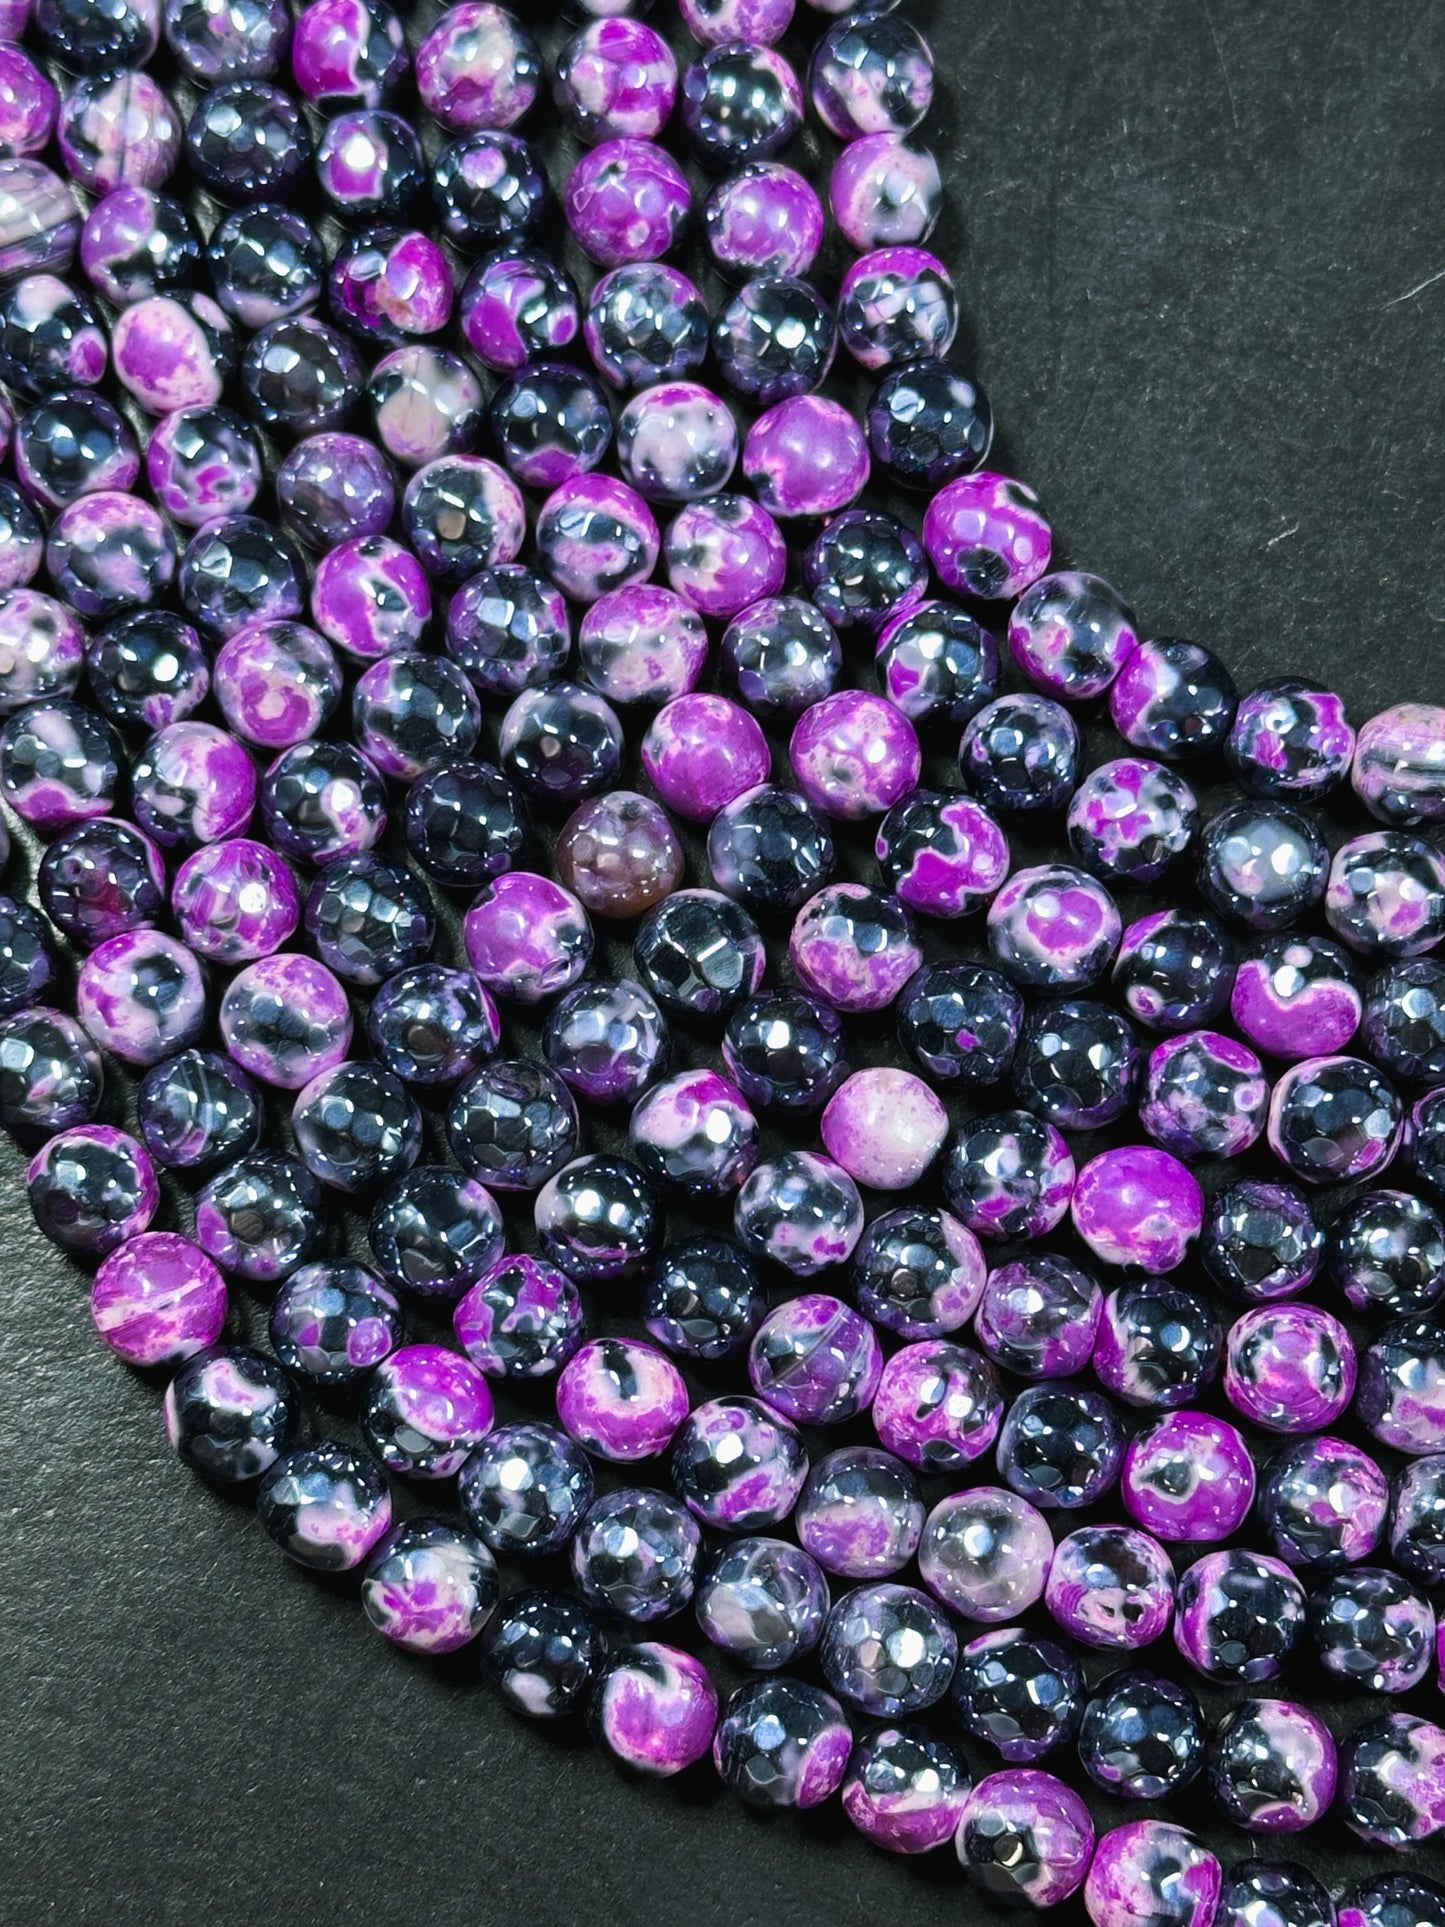 Mystic Natural Tibetan Agate Gemstone Bead Faceted 8mm 10mm Round Beads, Beautiful Mystic Black Pink Agate Stone Beads, Full Strand 15.5"